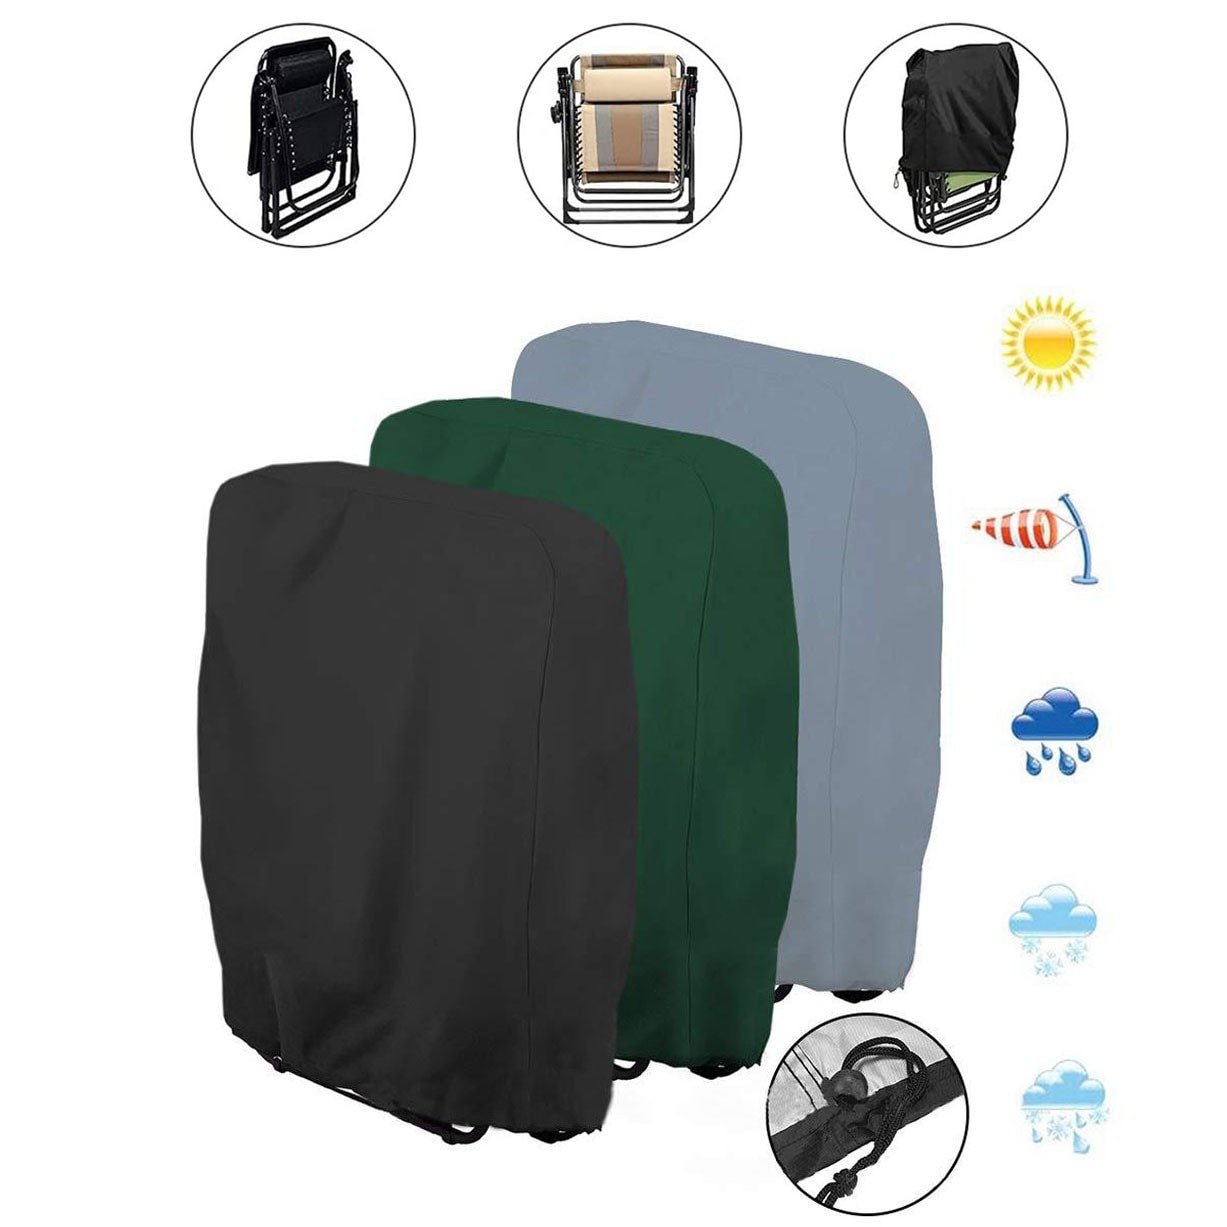 2020 Folding Chair Cover Recliner Cover Waterproof UV Oxford Cloth Waterproof Chair Cover Outdoor Chair Coveres 110cmX71cm